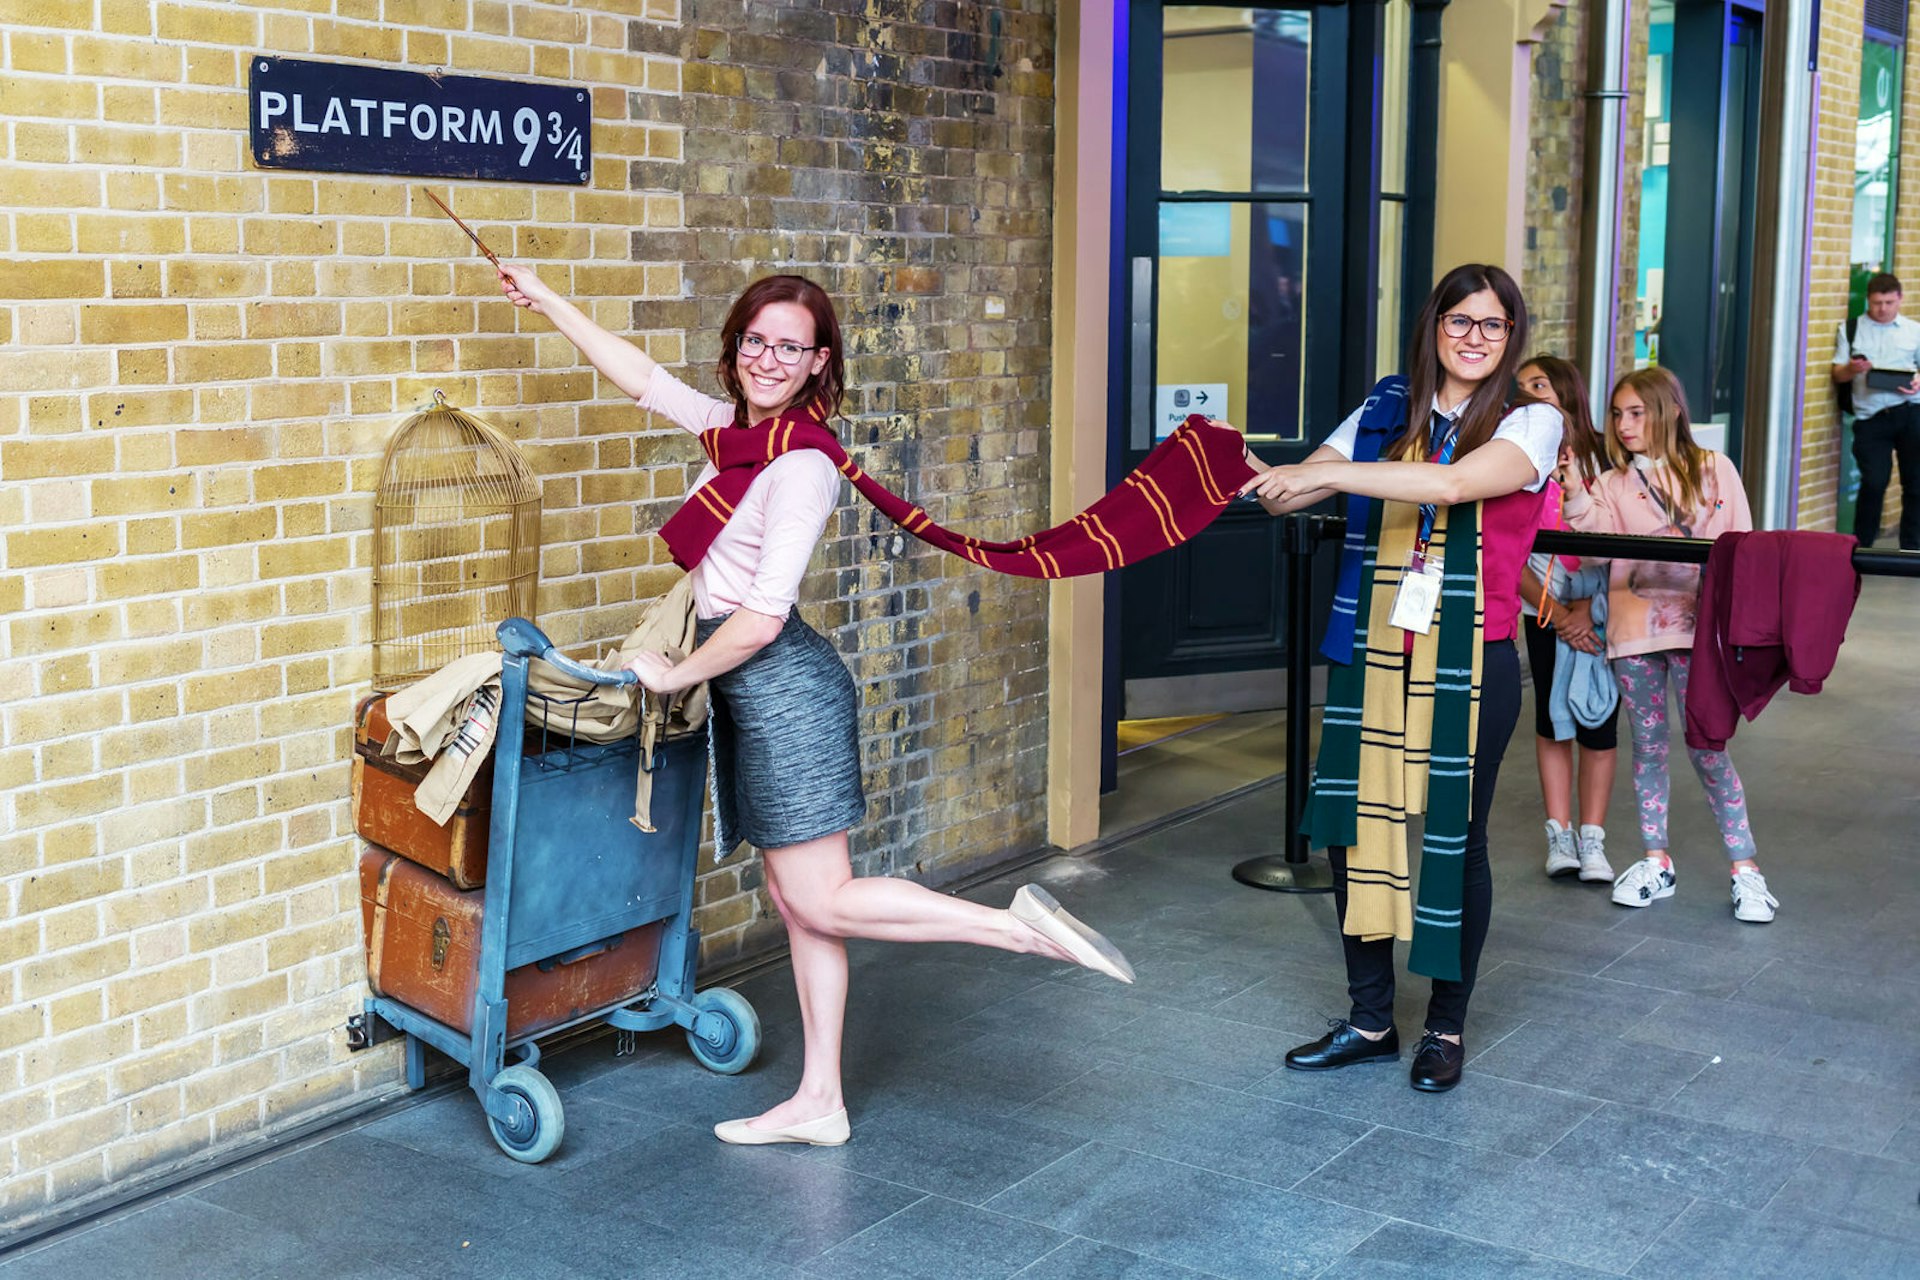 Platform 9¾ at King's Cross is a popular stop for pics © Chris Mueller / Getty Images